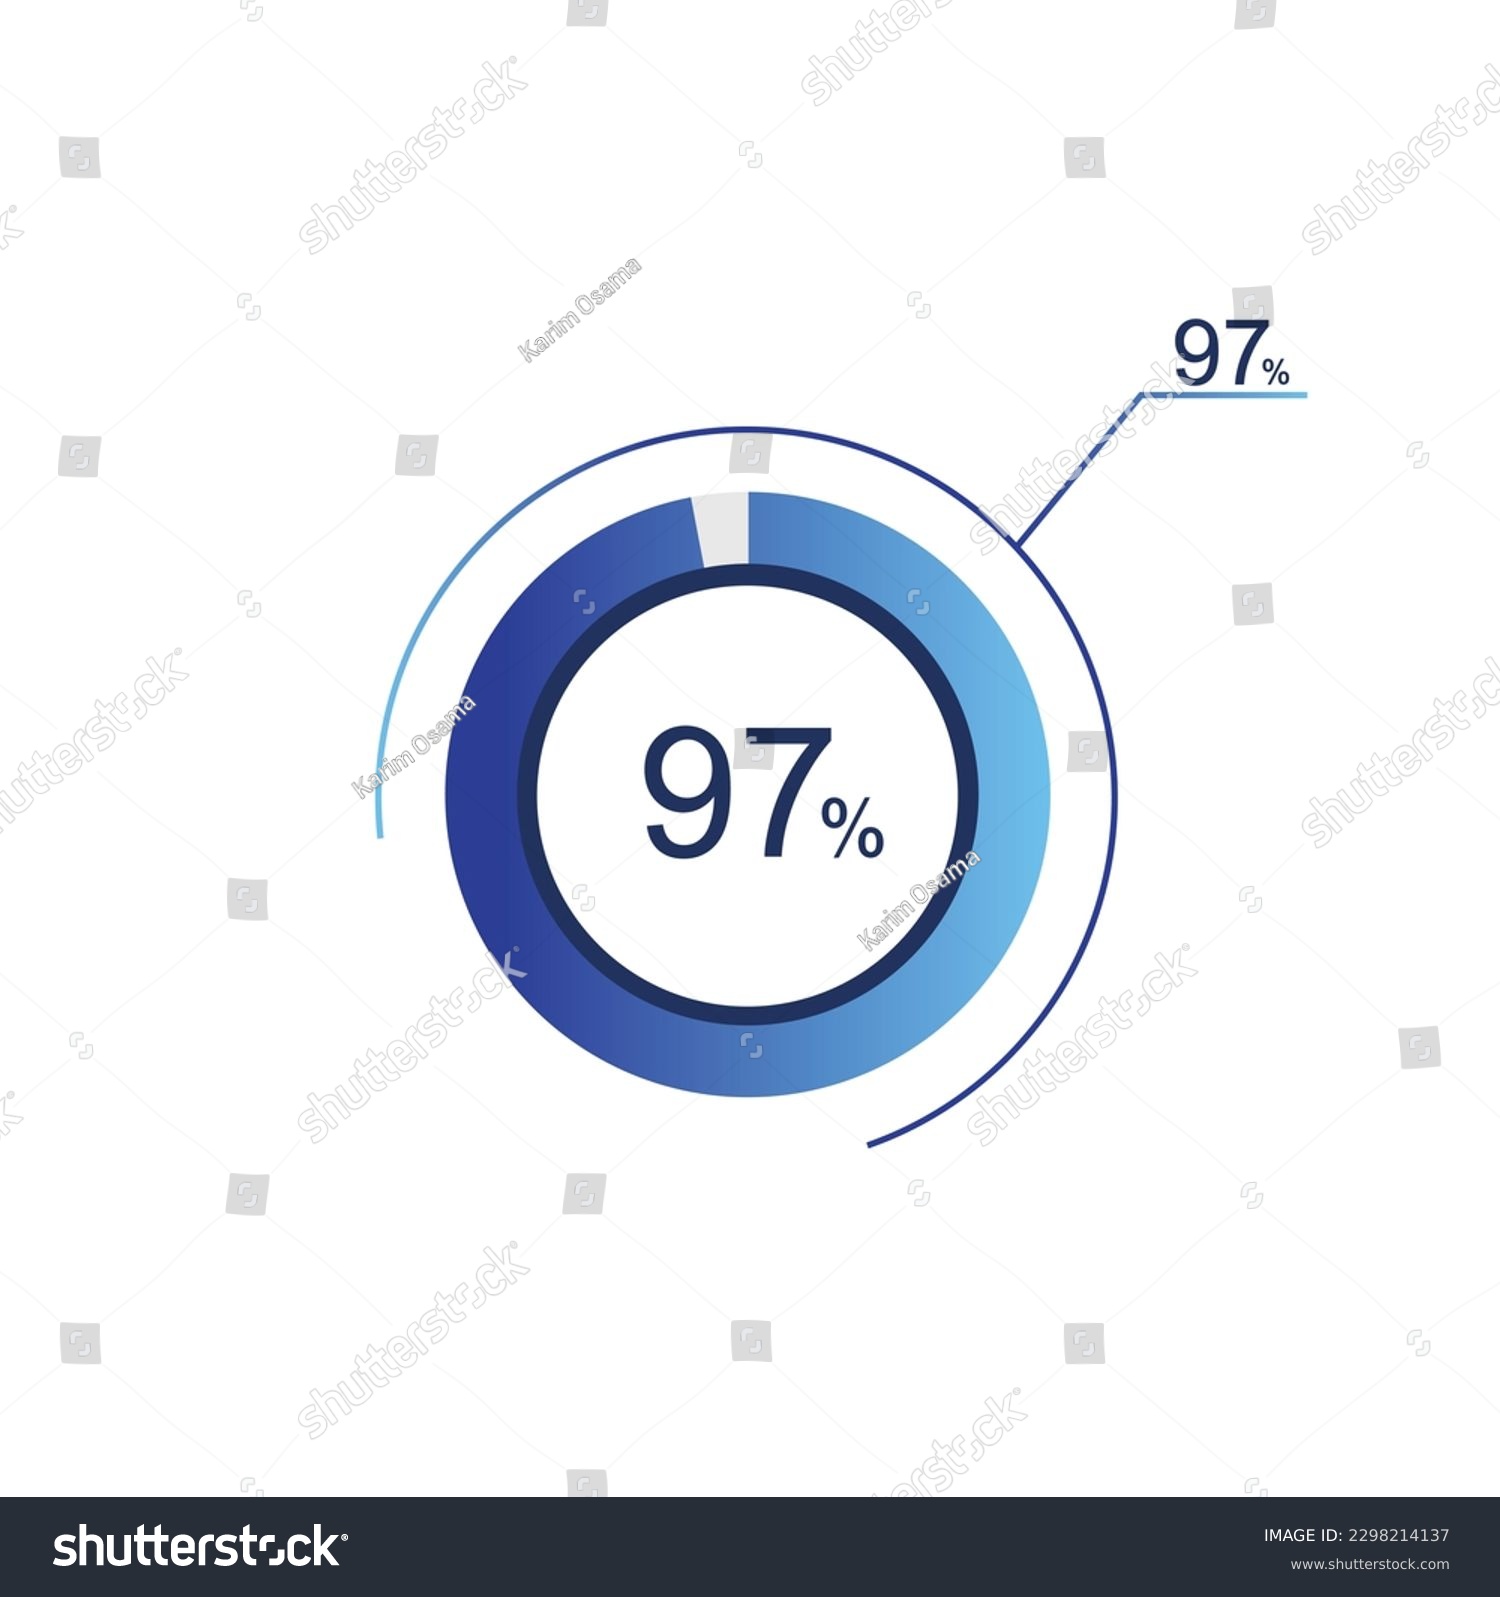 SVG of 97% percentage infographic circle icons, 97 percents pie chart infographic elements for Illustration, business, web design. svg